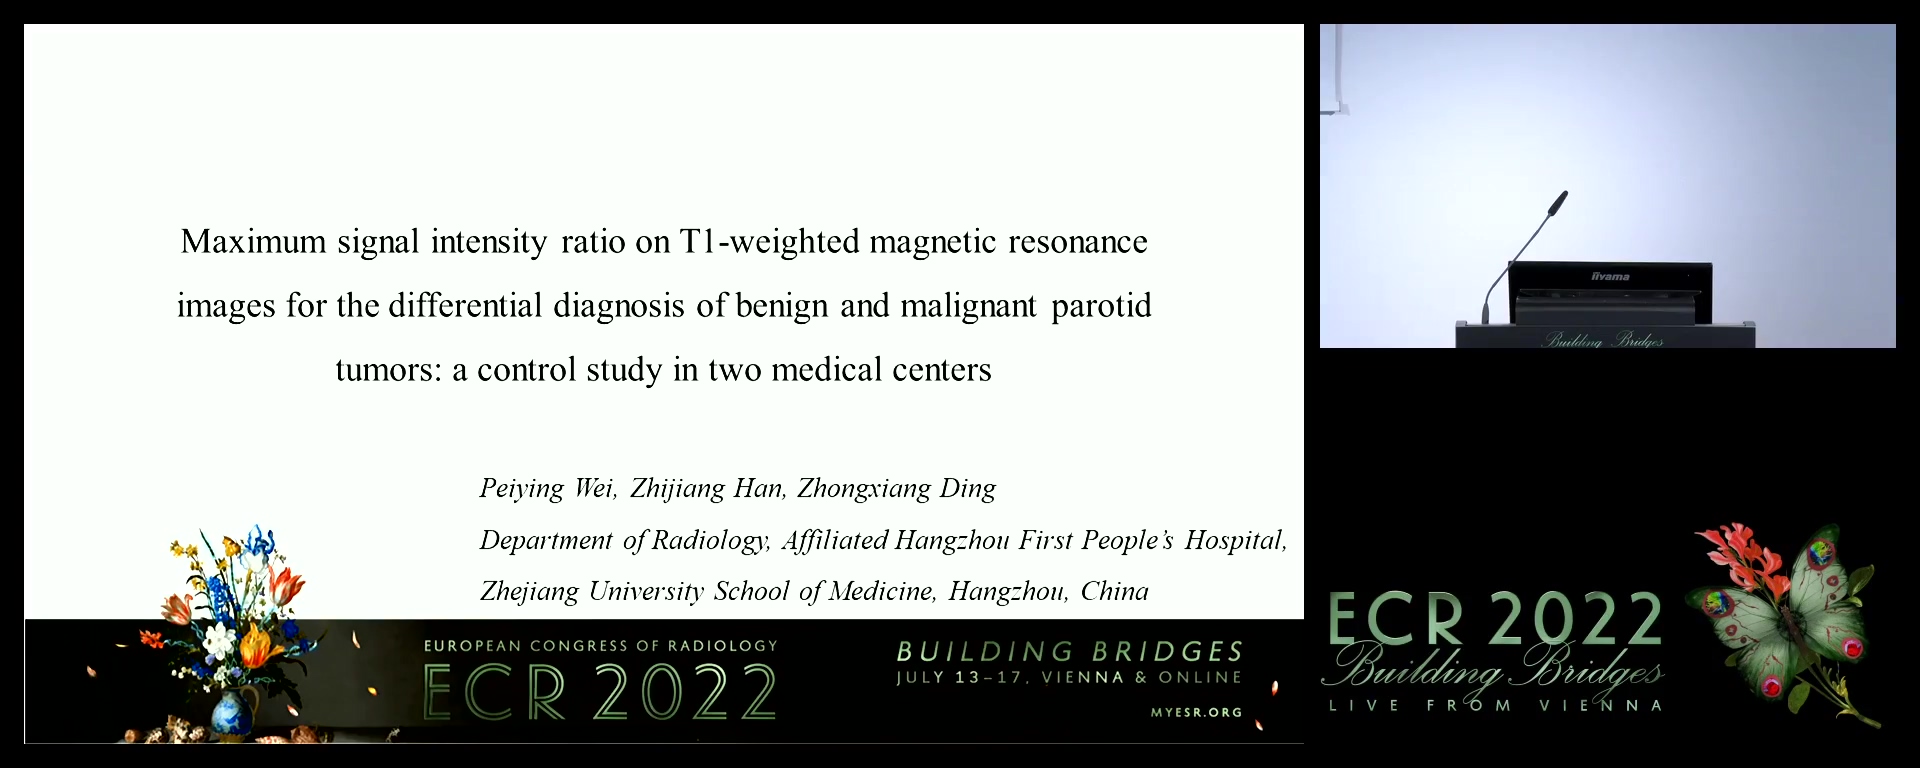 Maximum signal intensity ratio on T1-weighted magnetic resonance images for the differential diagnosis of benign and malignant parotid tumours: a control study in two medical centres - Zhongxiang Ding, Hangzhou / CN